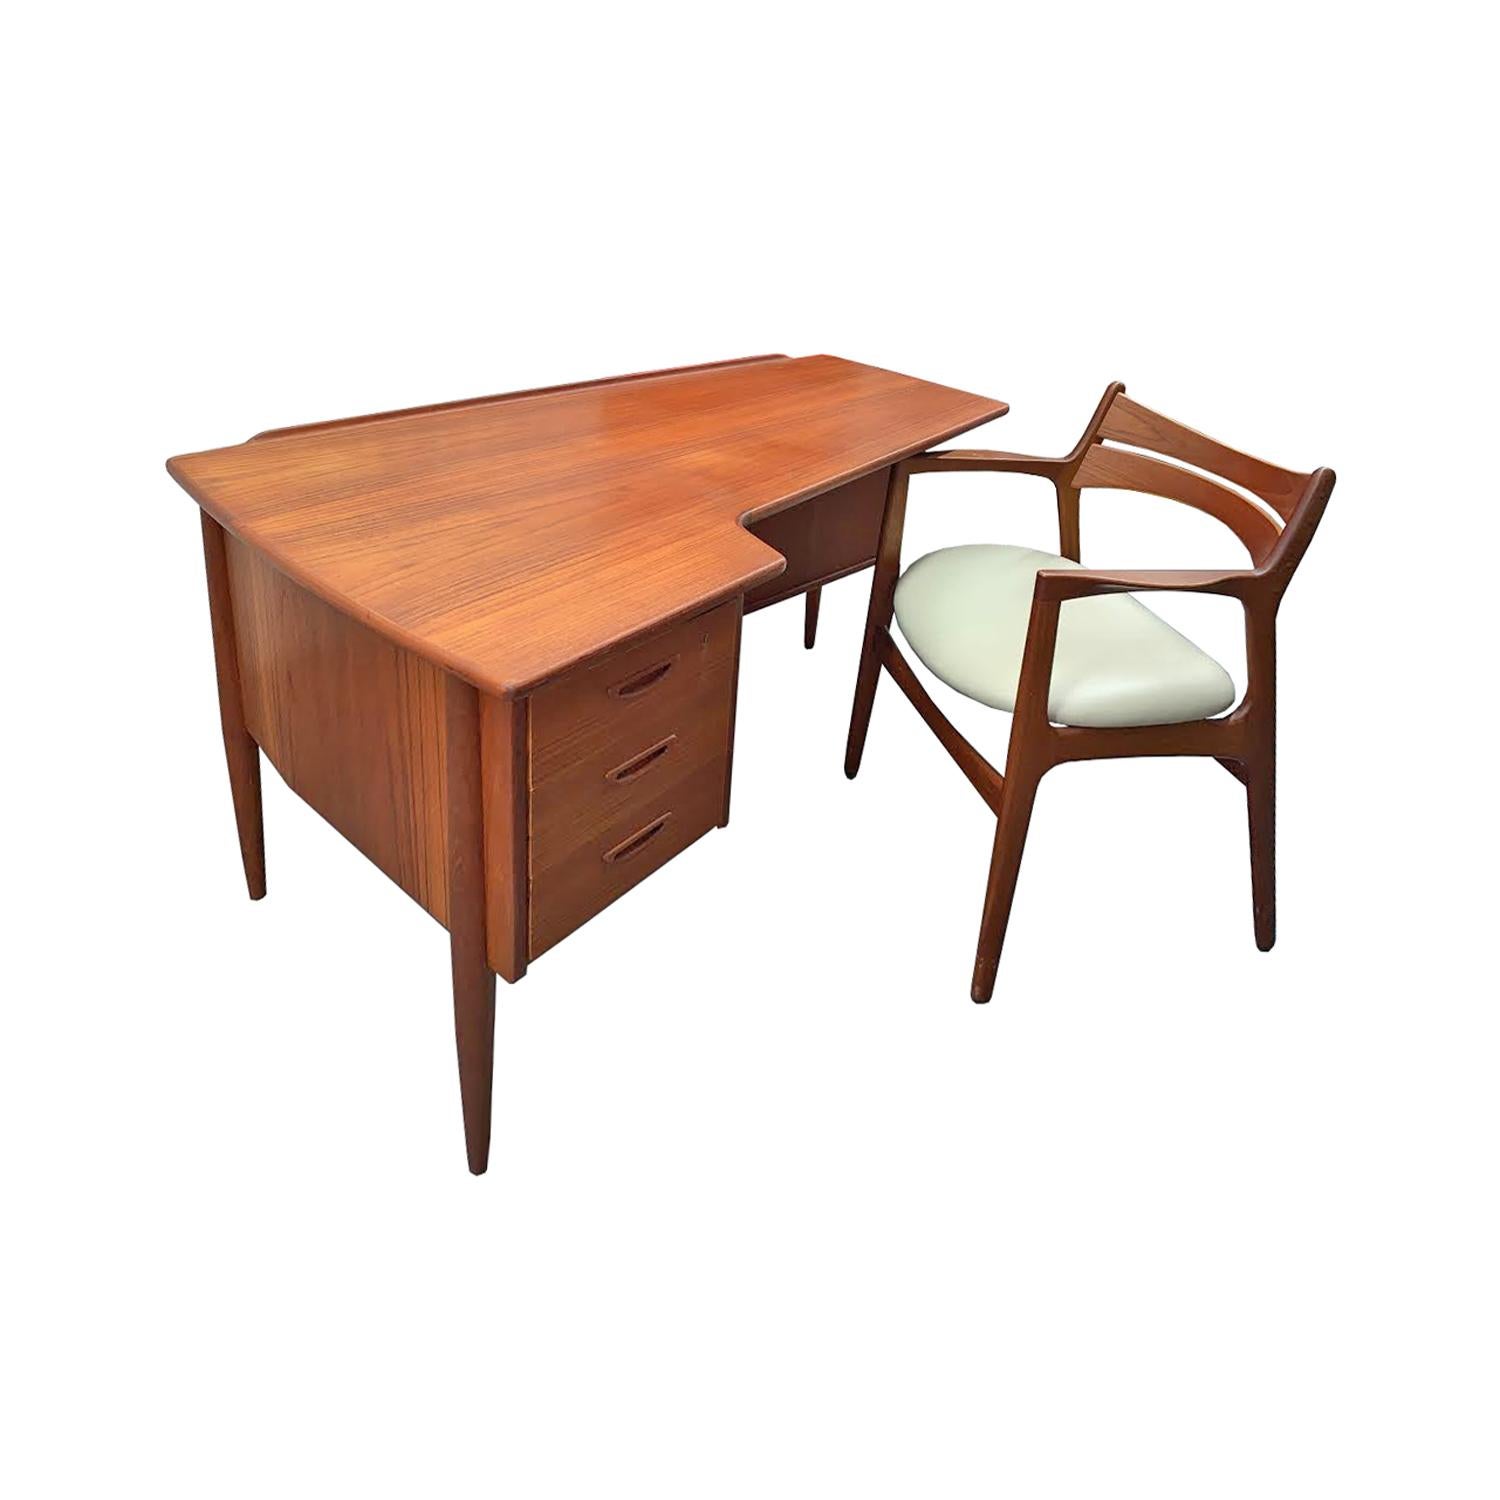 Beautifully Crafted Swedish Desk in Teak, 1960s For Sale 2